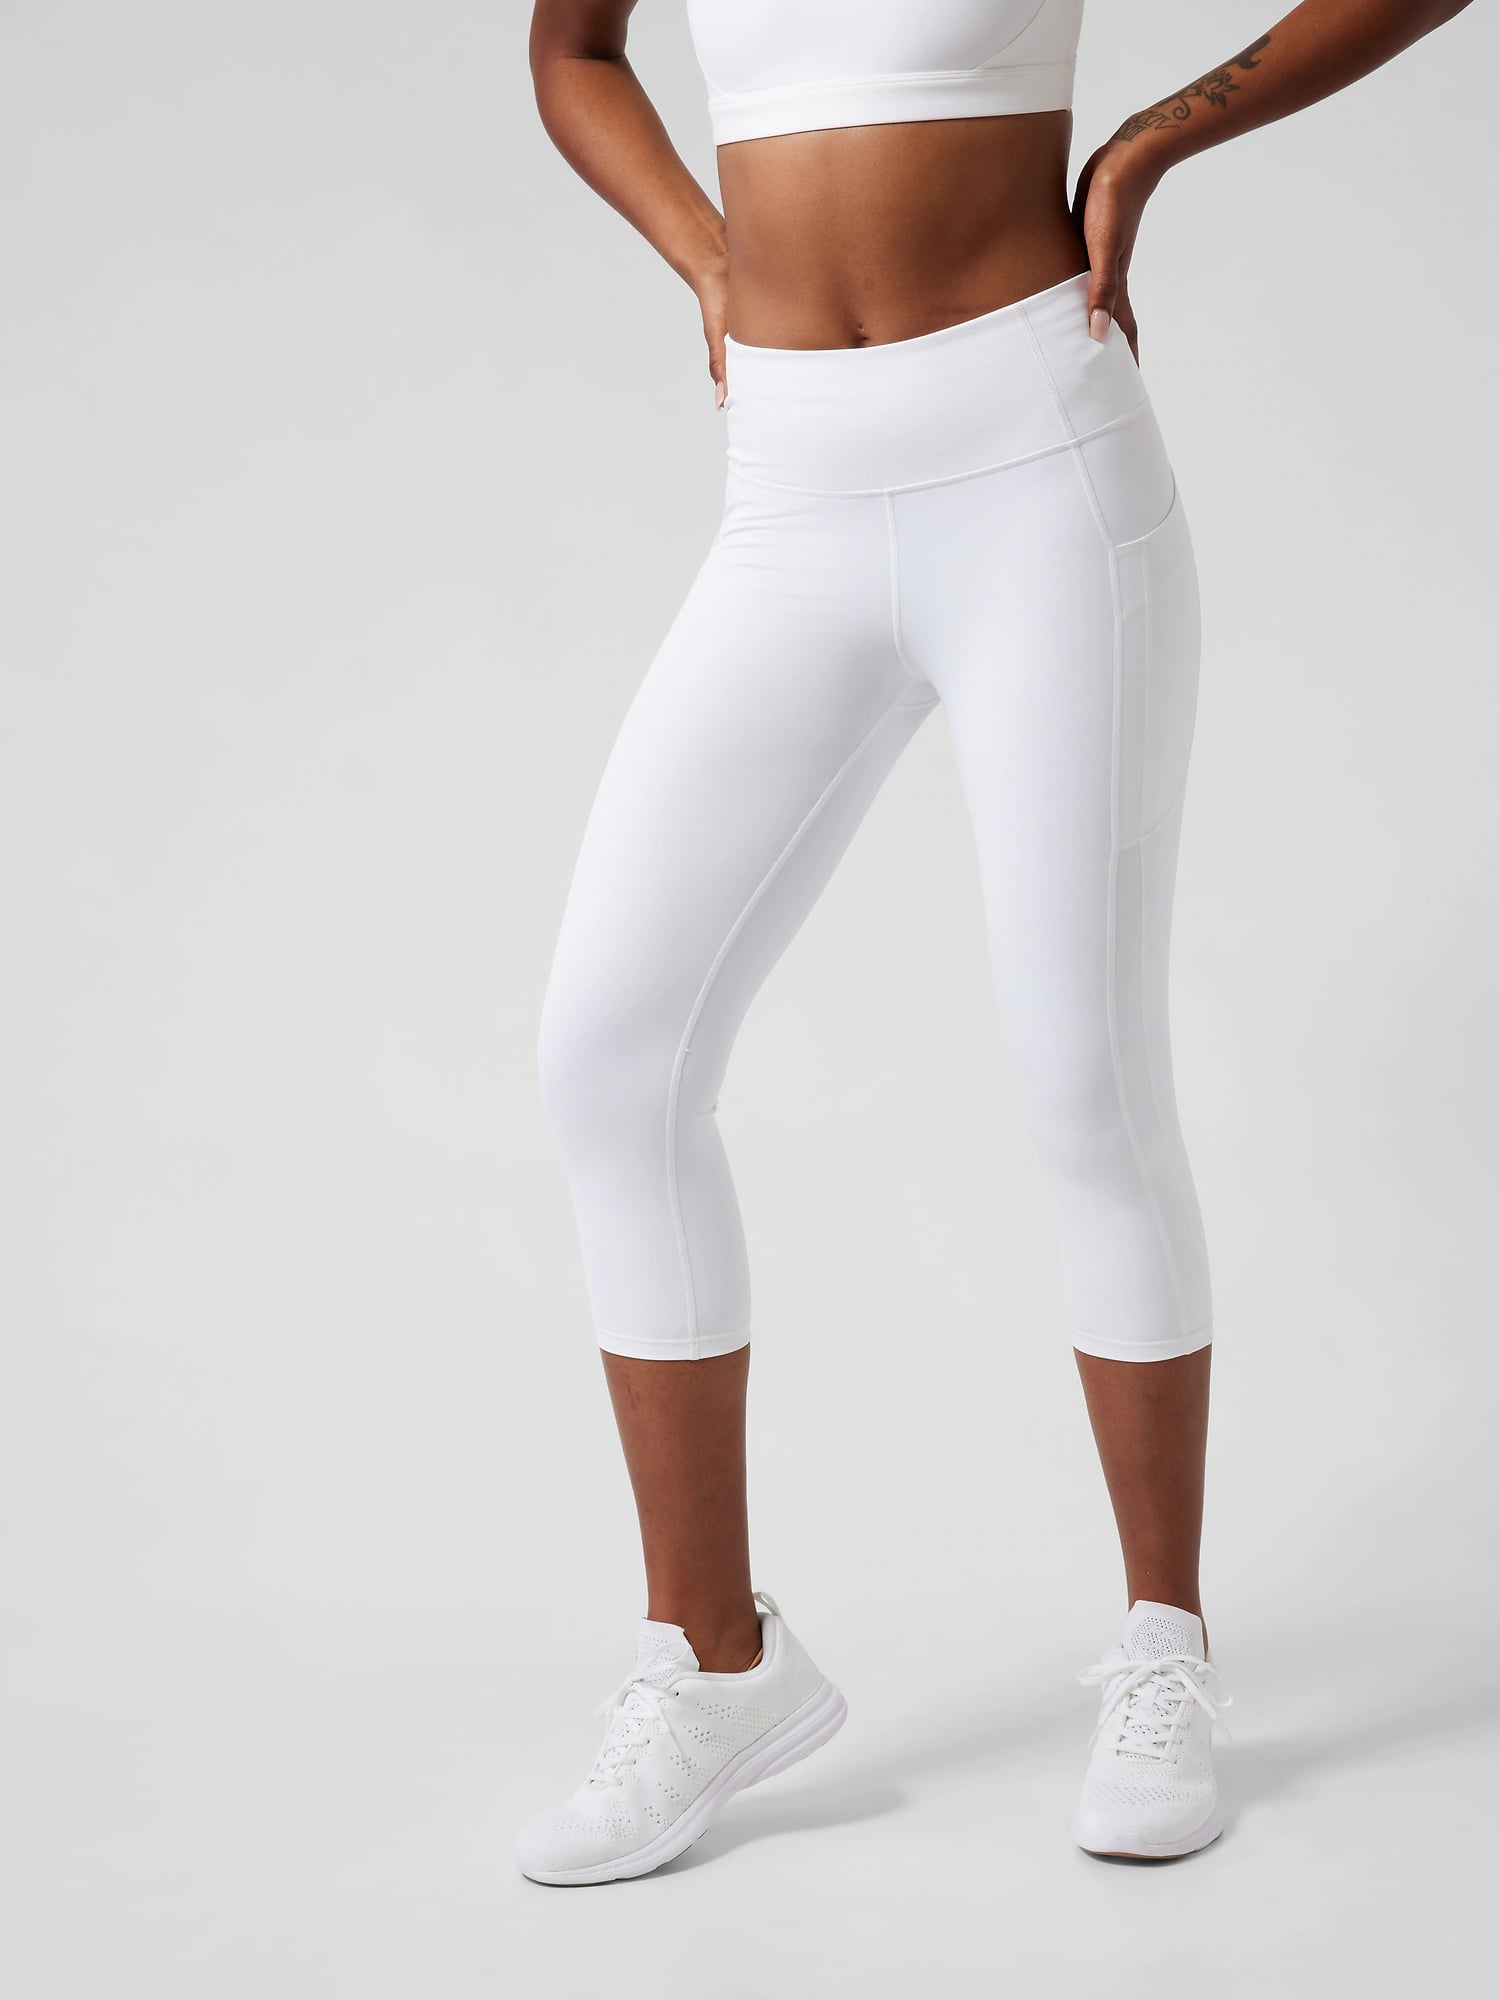 Womens White Leggings Workout Leggings / White Yoga Pants With Sports Style  Print Perfect for Running, Jogging, Crossfit Non See Through -  Israel